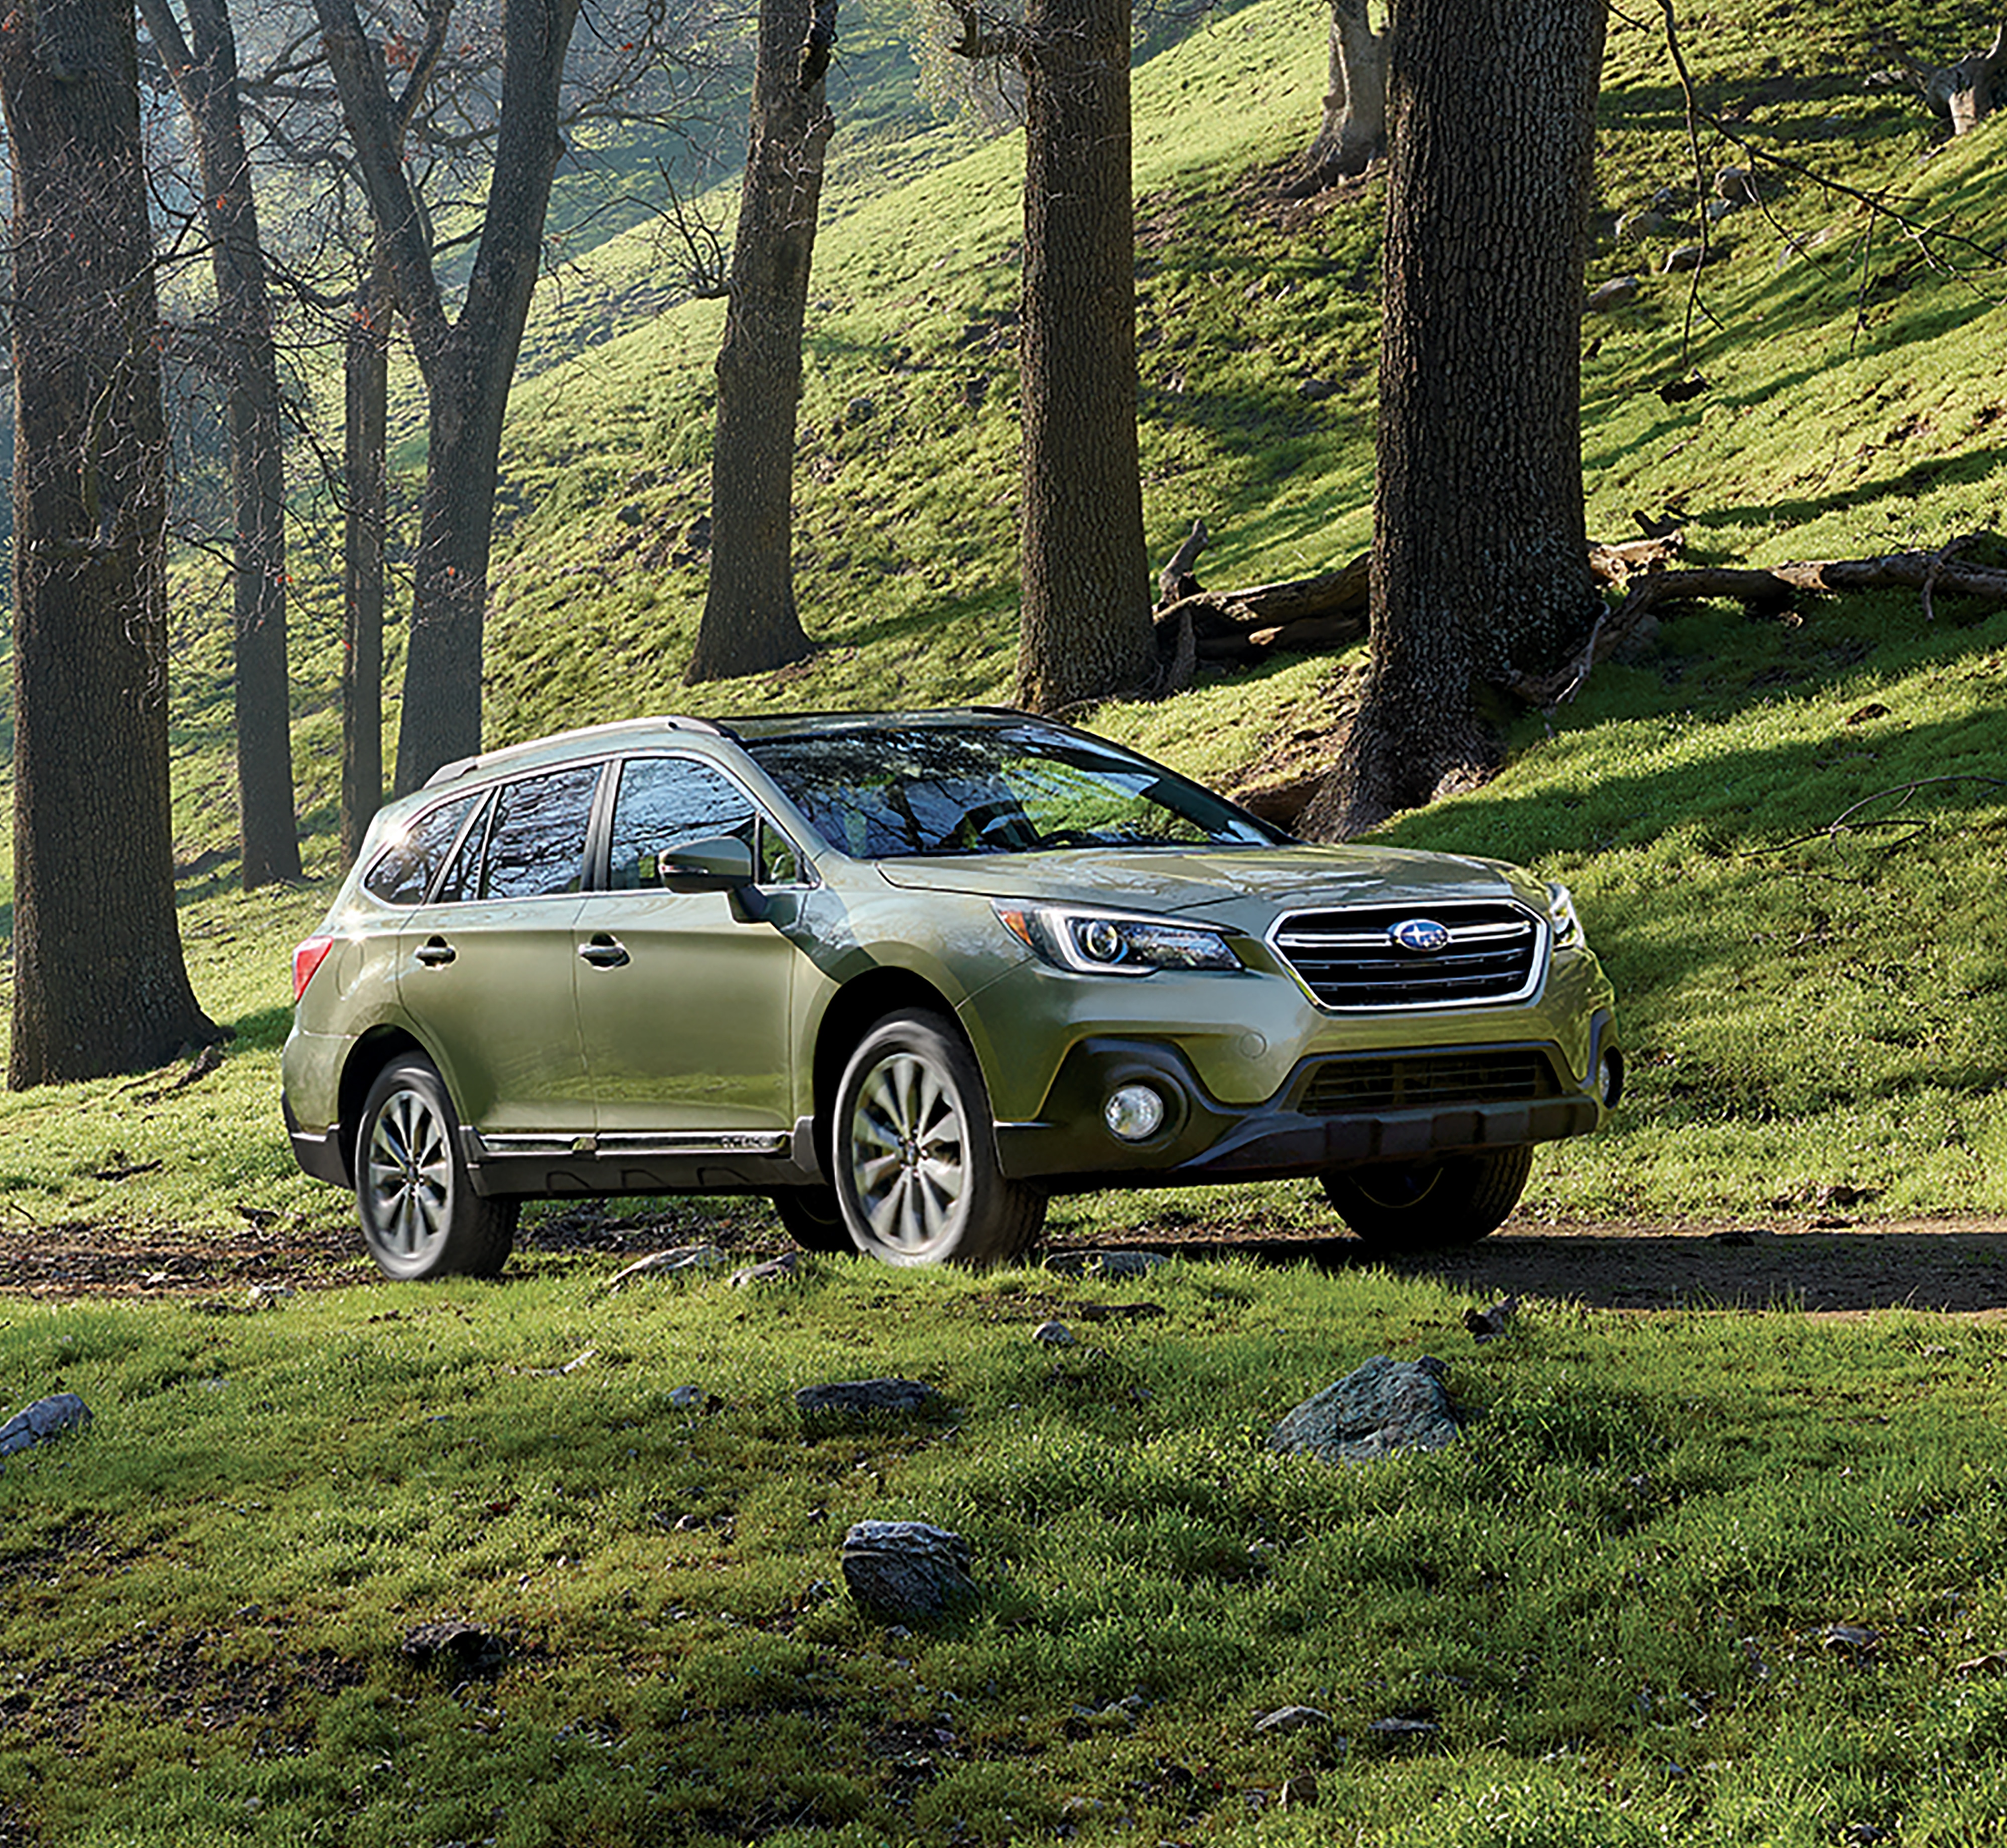 Four Reasons Why The Subaru Outback Is Great For Outdoors